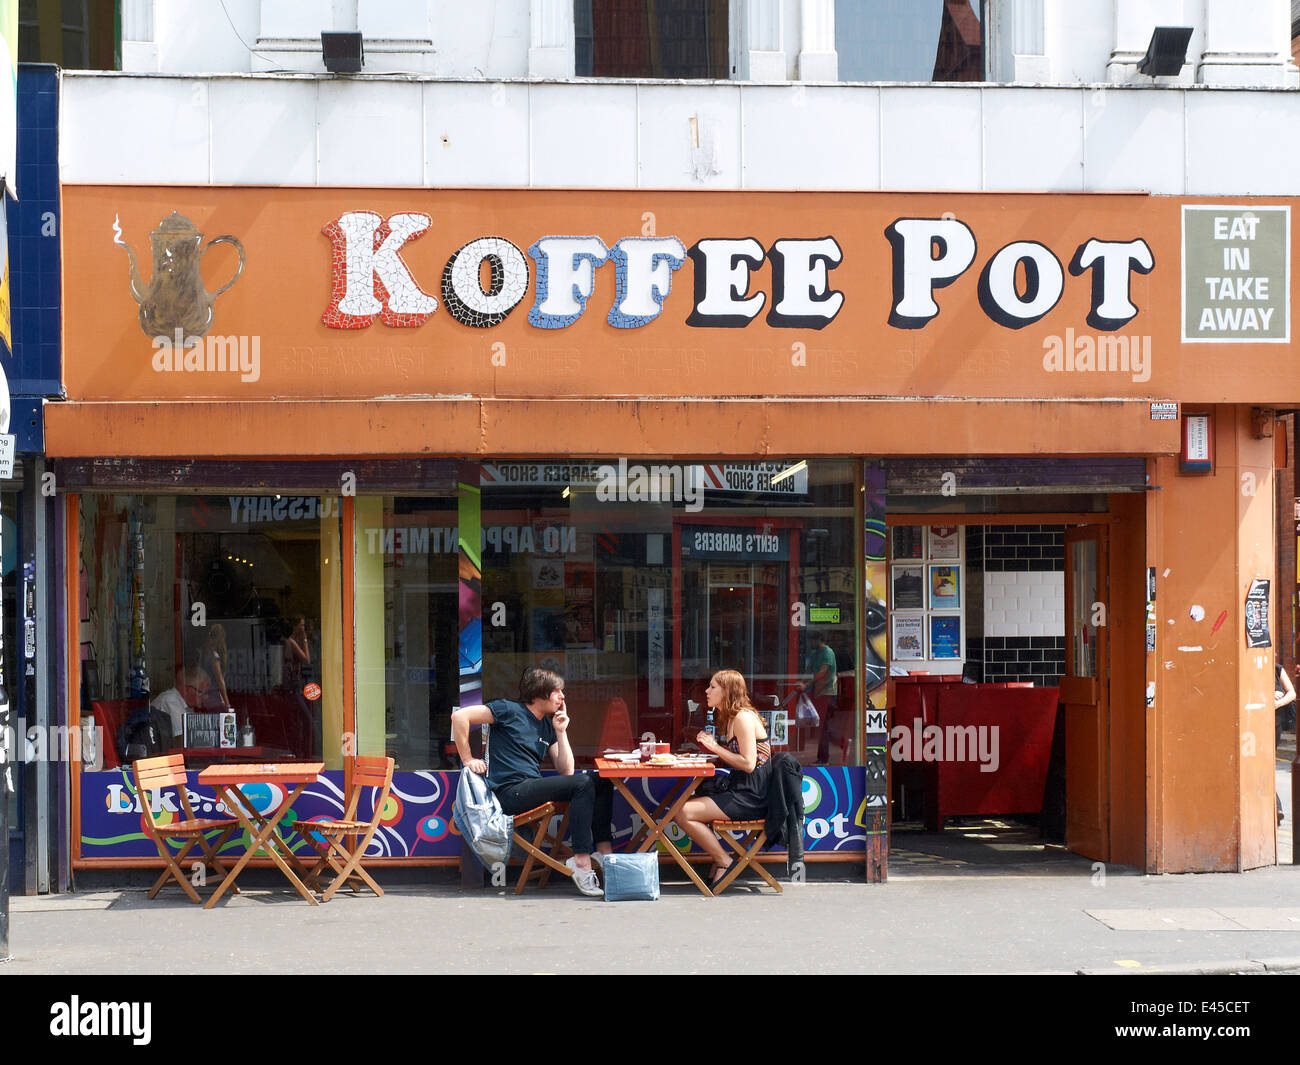 Koffee Pot in Northern Quarter Manchester UK Stock Photo